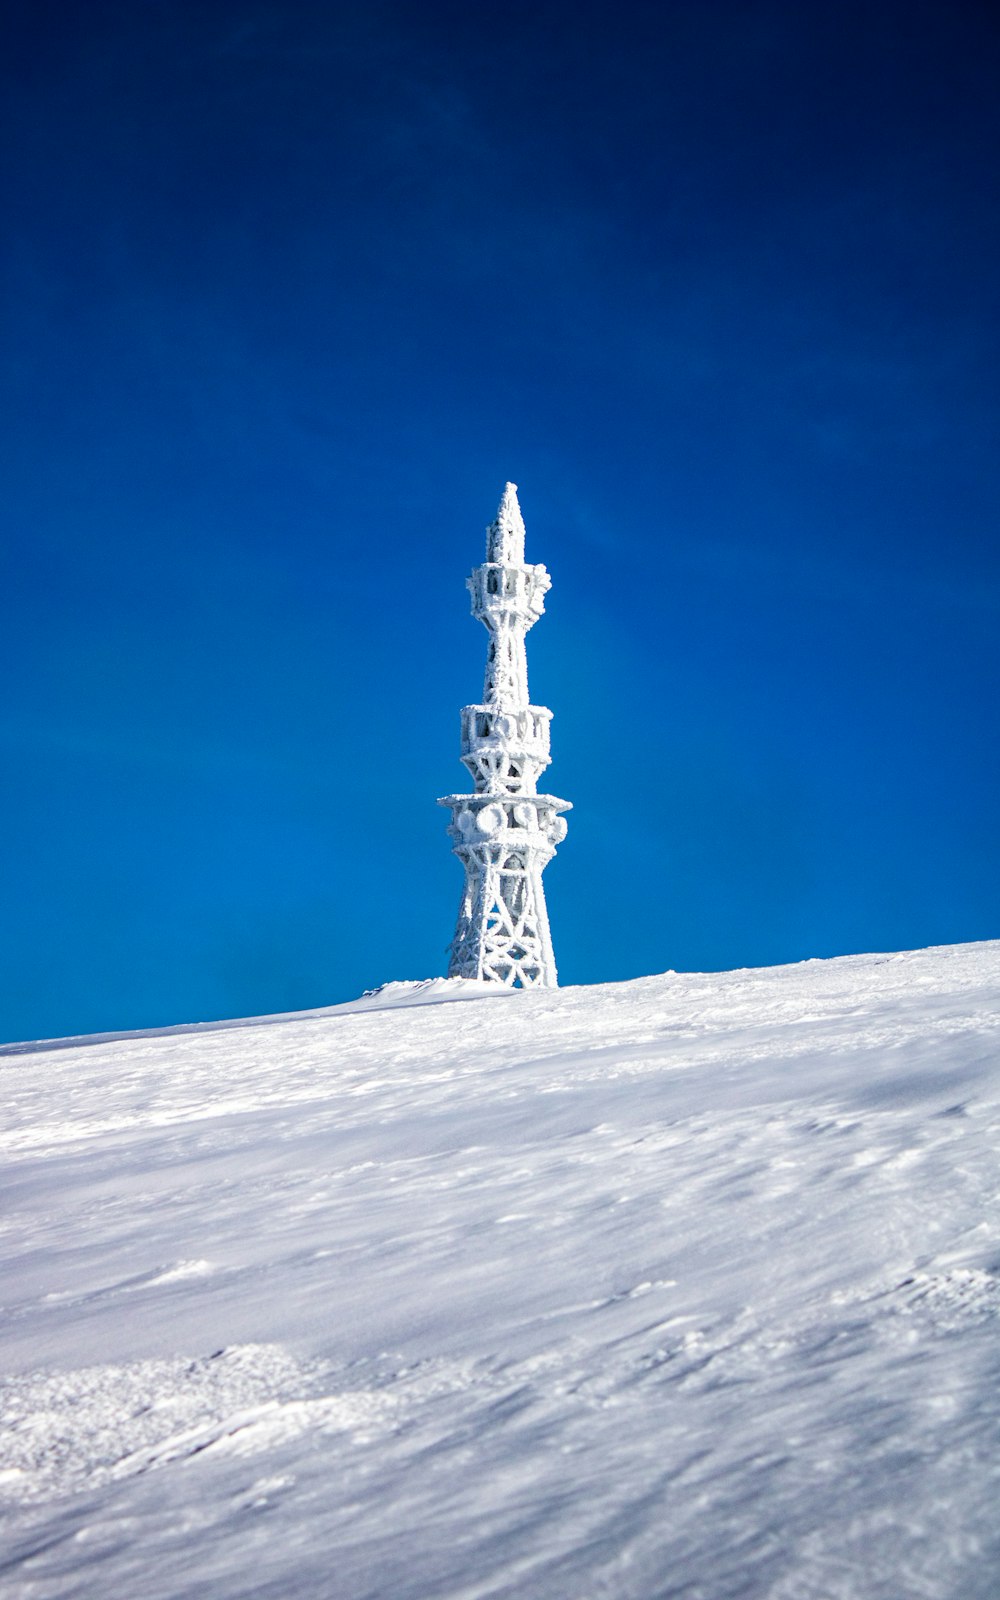 white tower on snow covered ground under blue sky during daytime